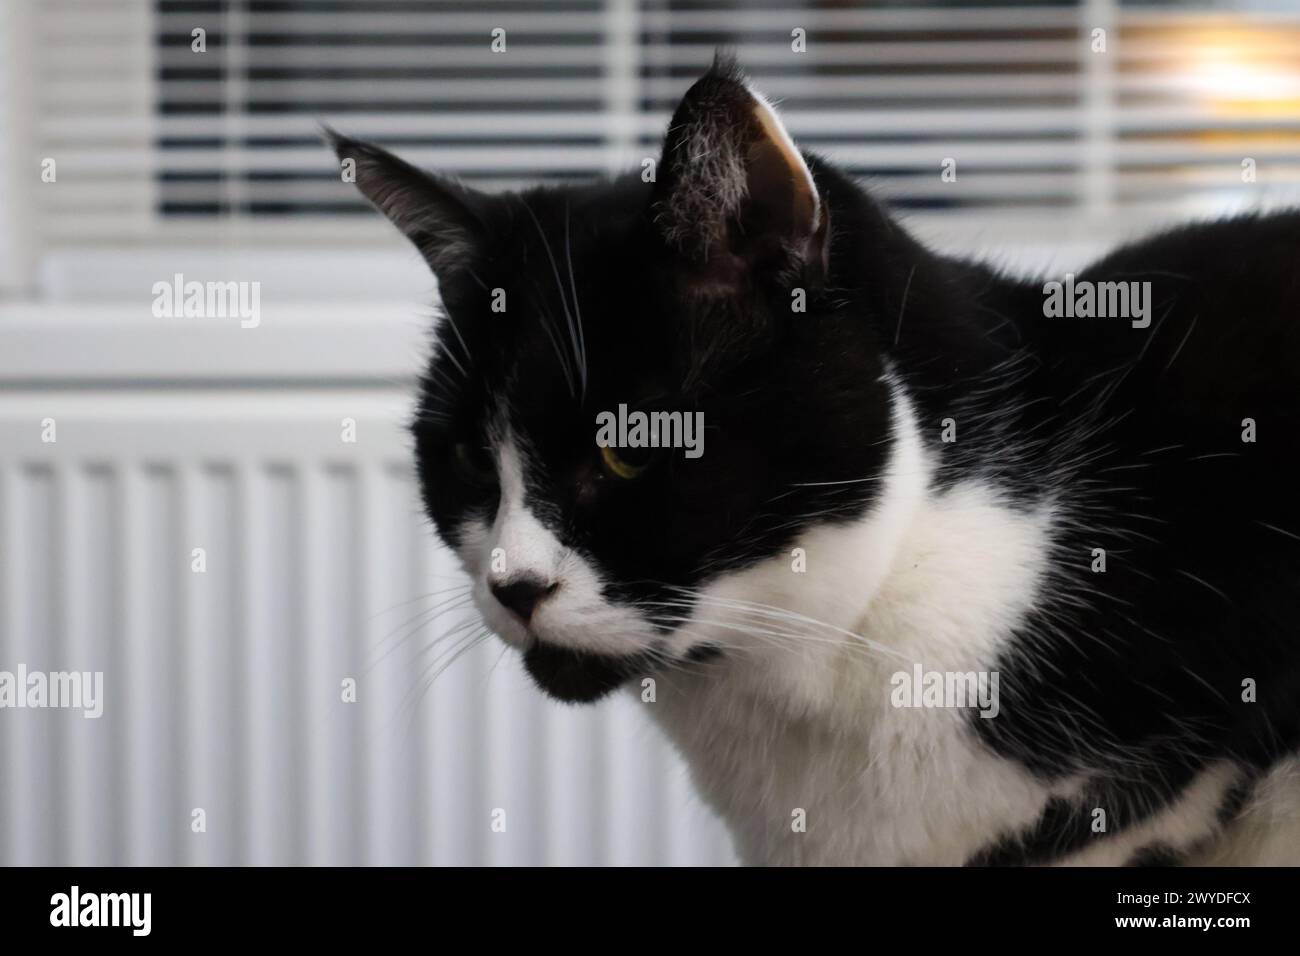 My mums cat who has a very loving personality. Images by Charles Dye Stock Photo